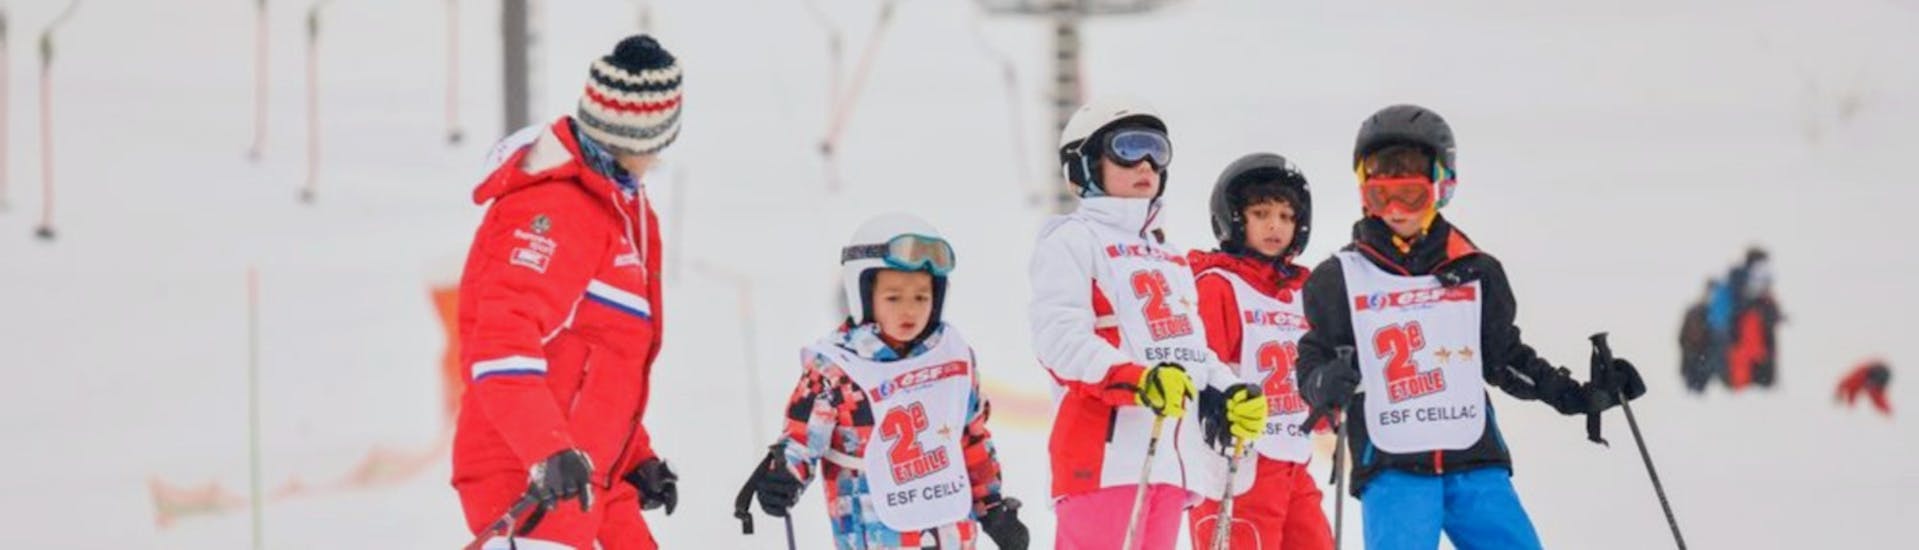 A great time on the slopes for the skiers of the ski school ESF Ceillac's kids ski lessons for all levels. 